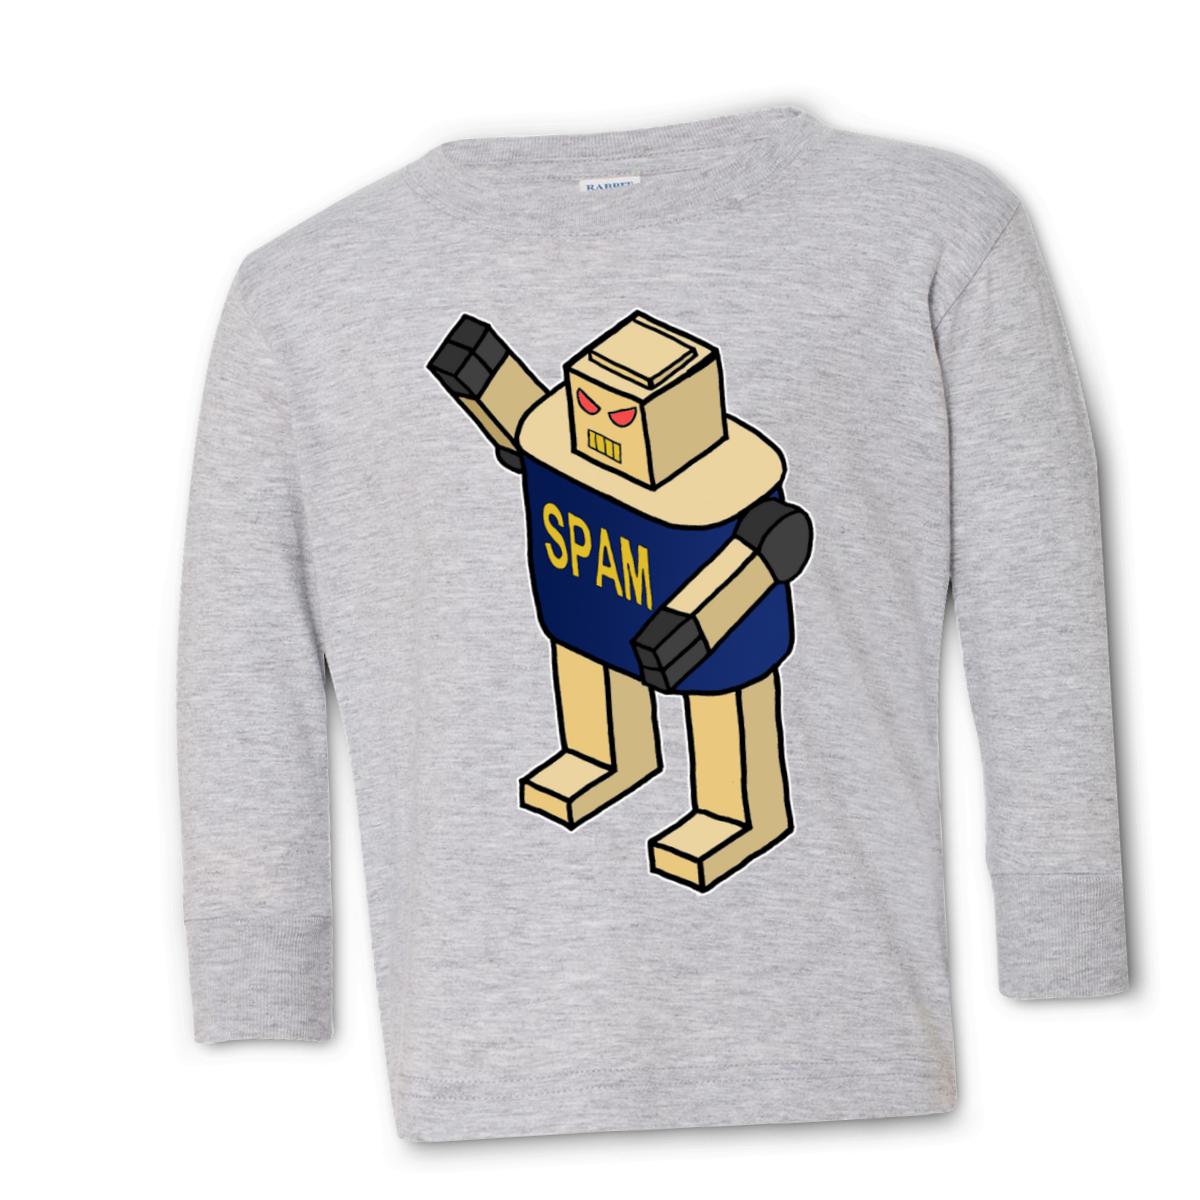 Spam Bot Toddler Long Sleeve Tee 4T heather